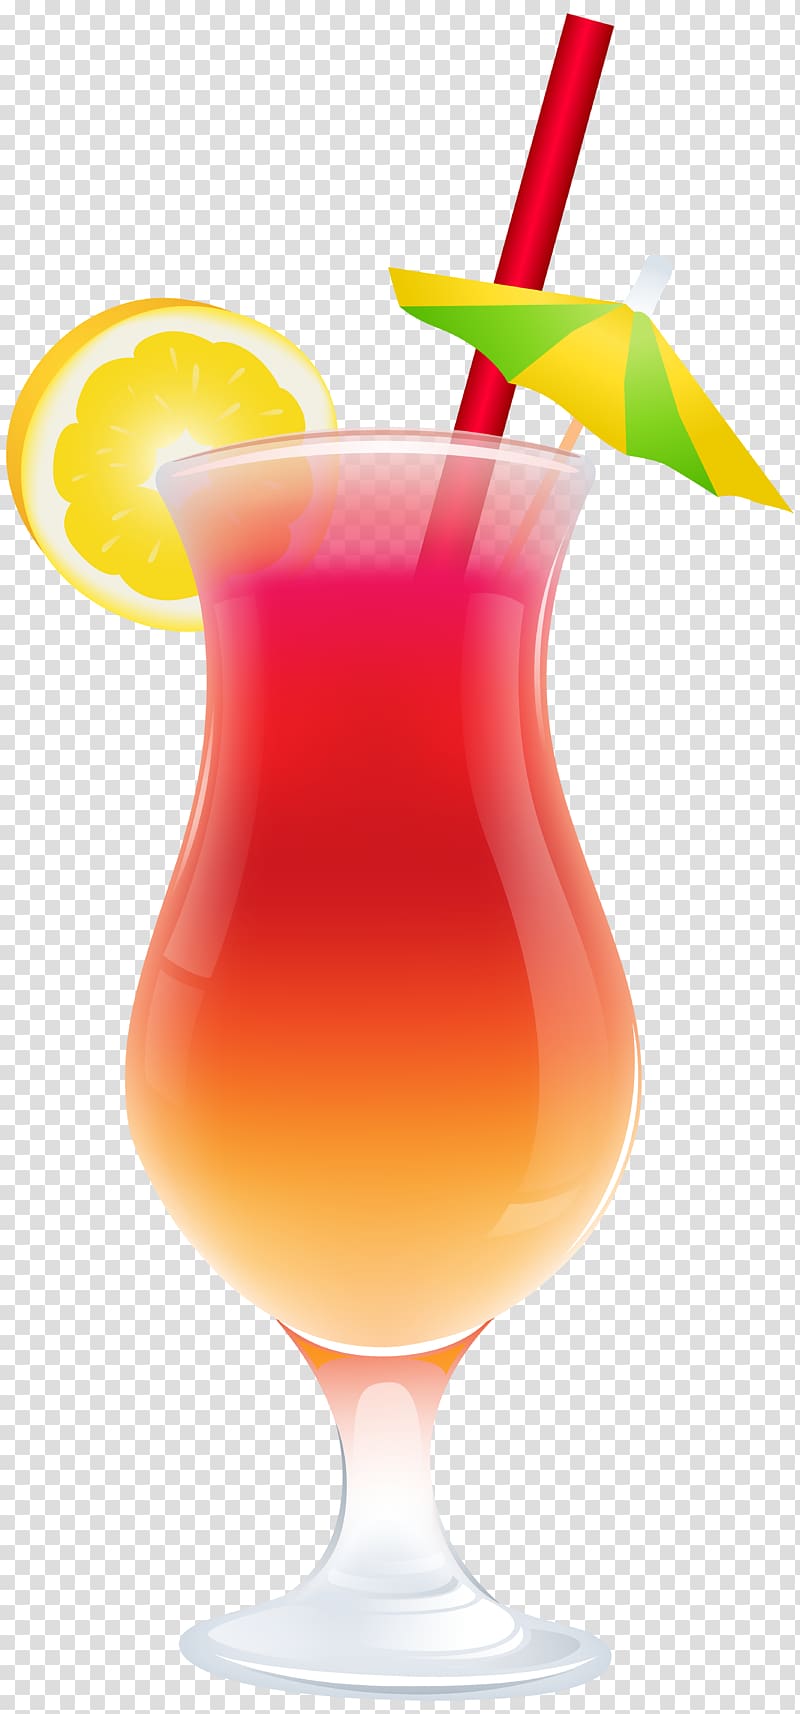 juice cup, Cocktail Mai Tai Harvey Wallbanger Bay Breeze Juice, drinks transparent background PNG clipart